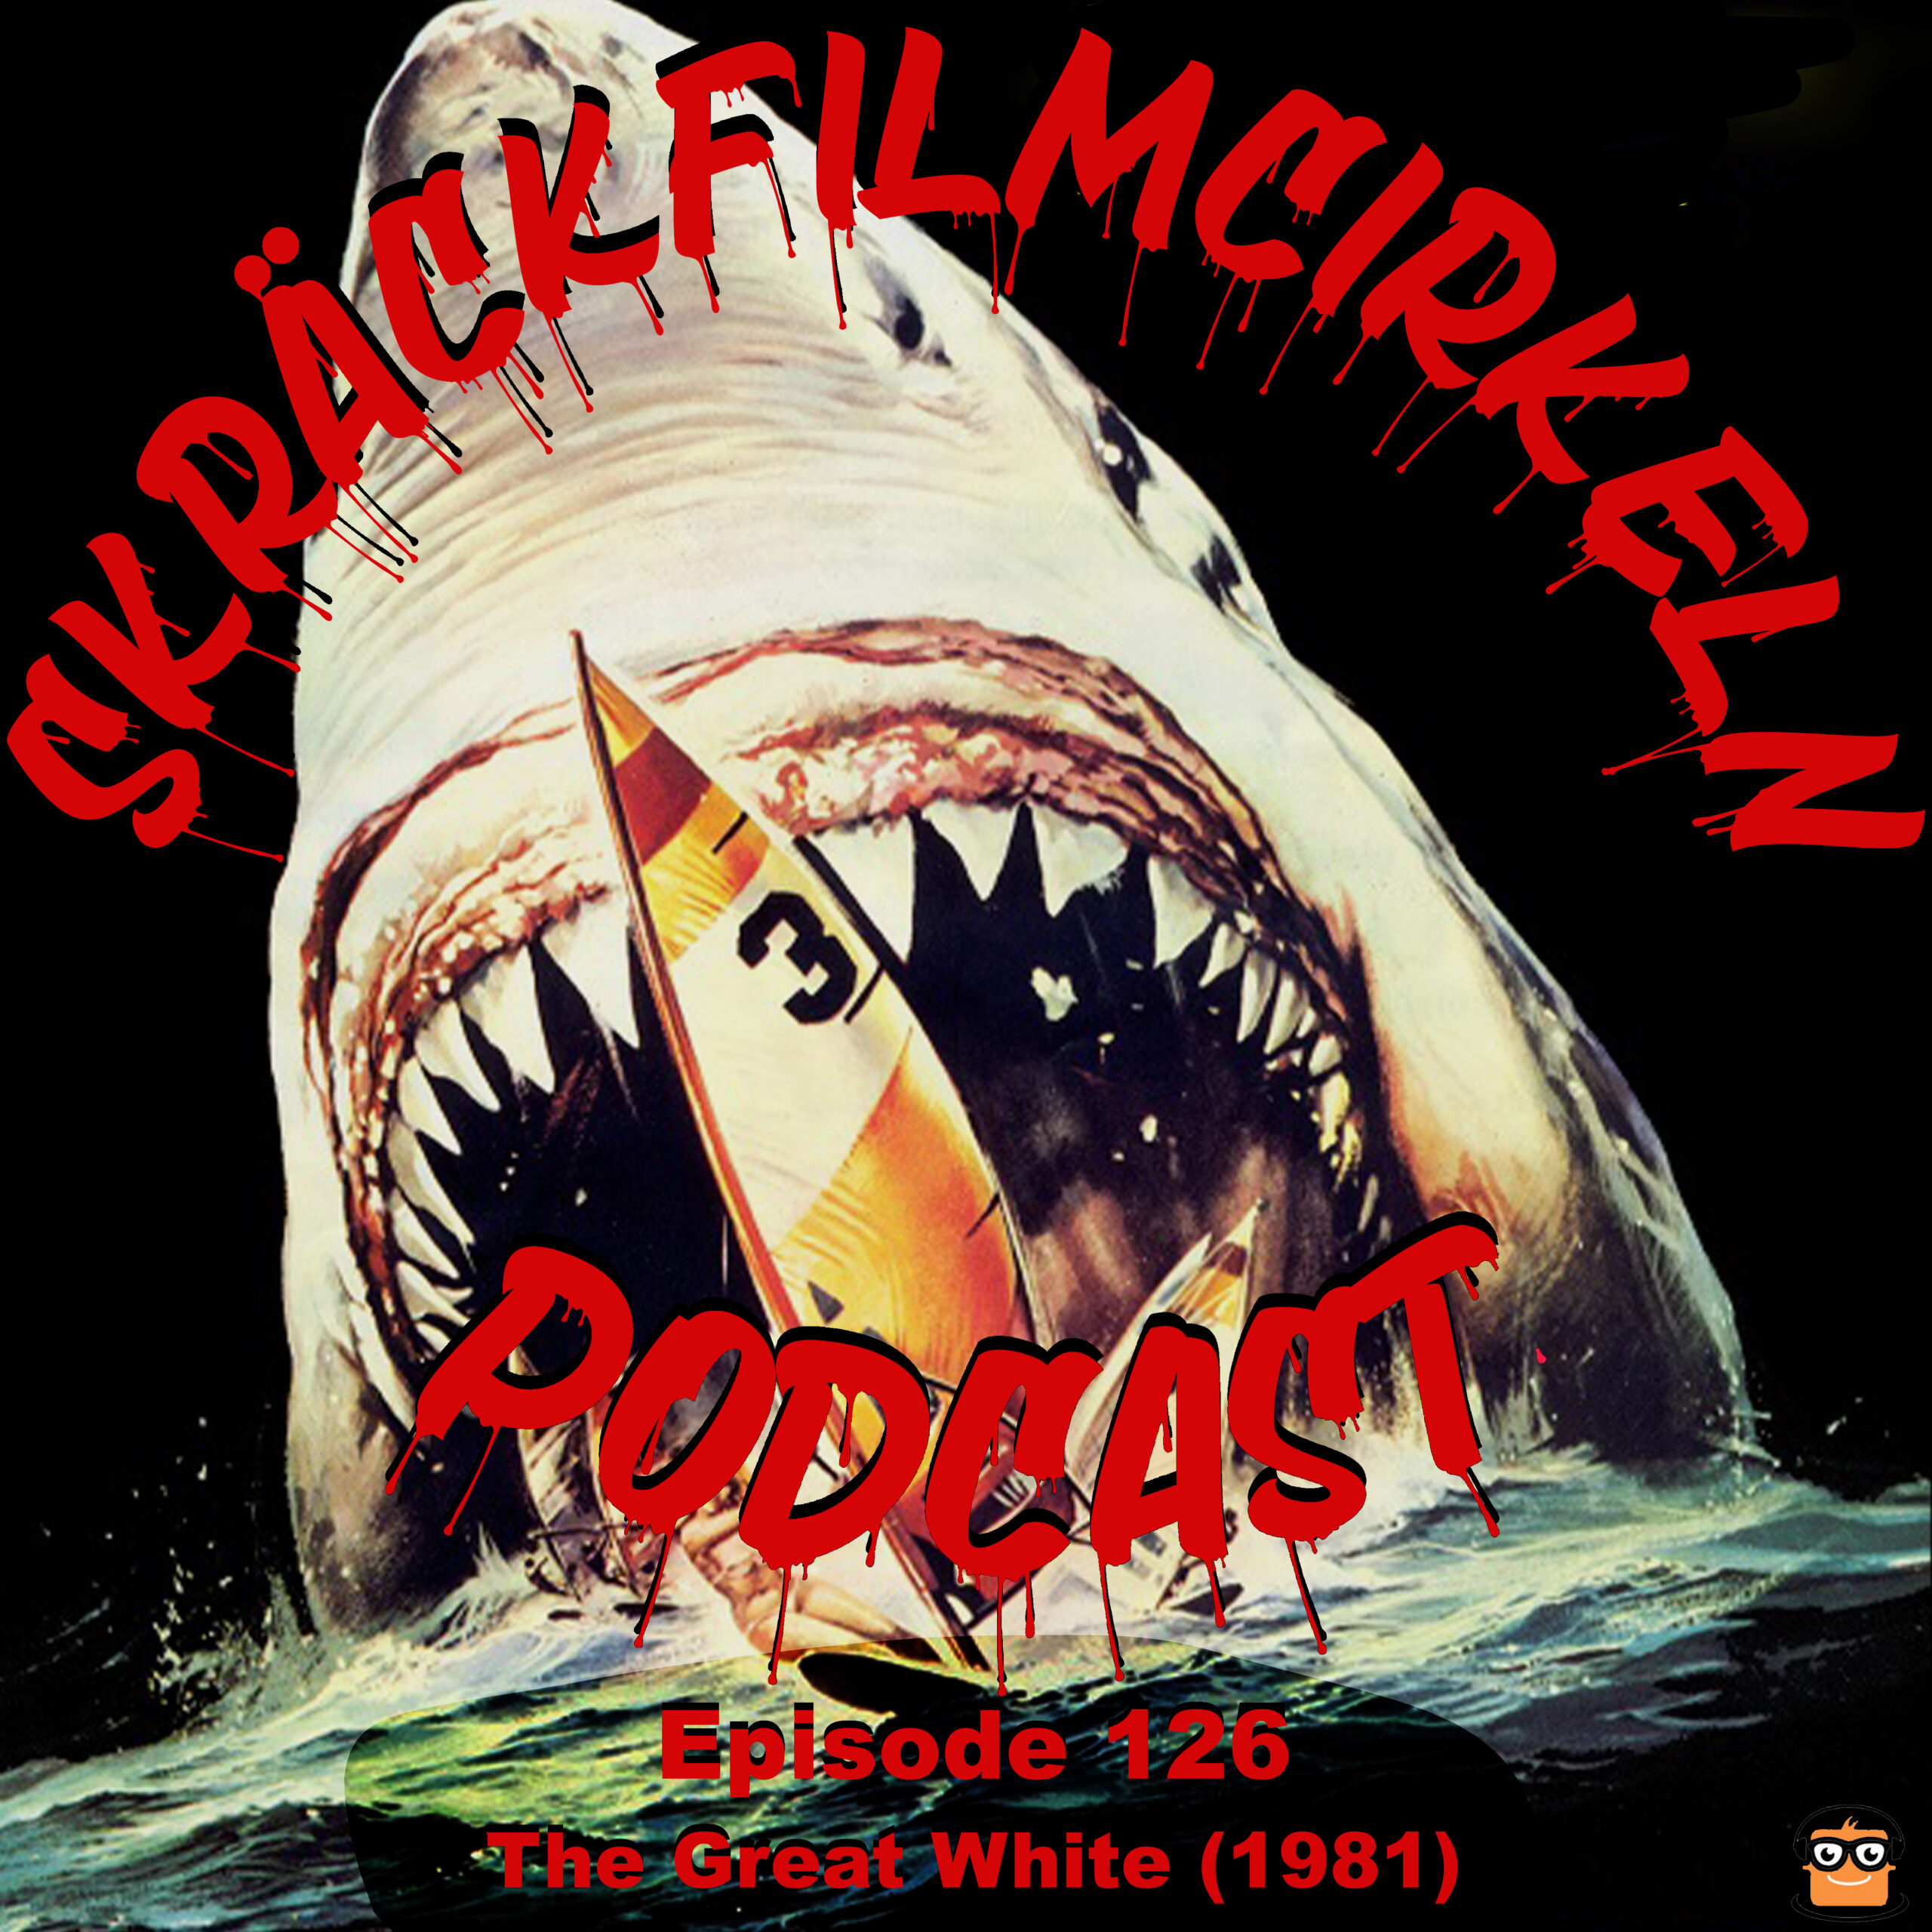 Episode 126 – The Great White (1981)